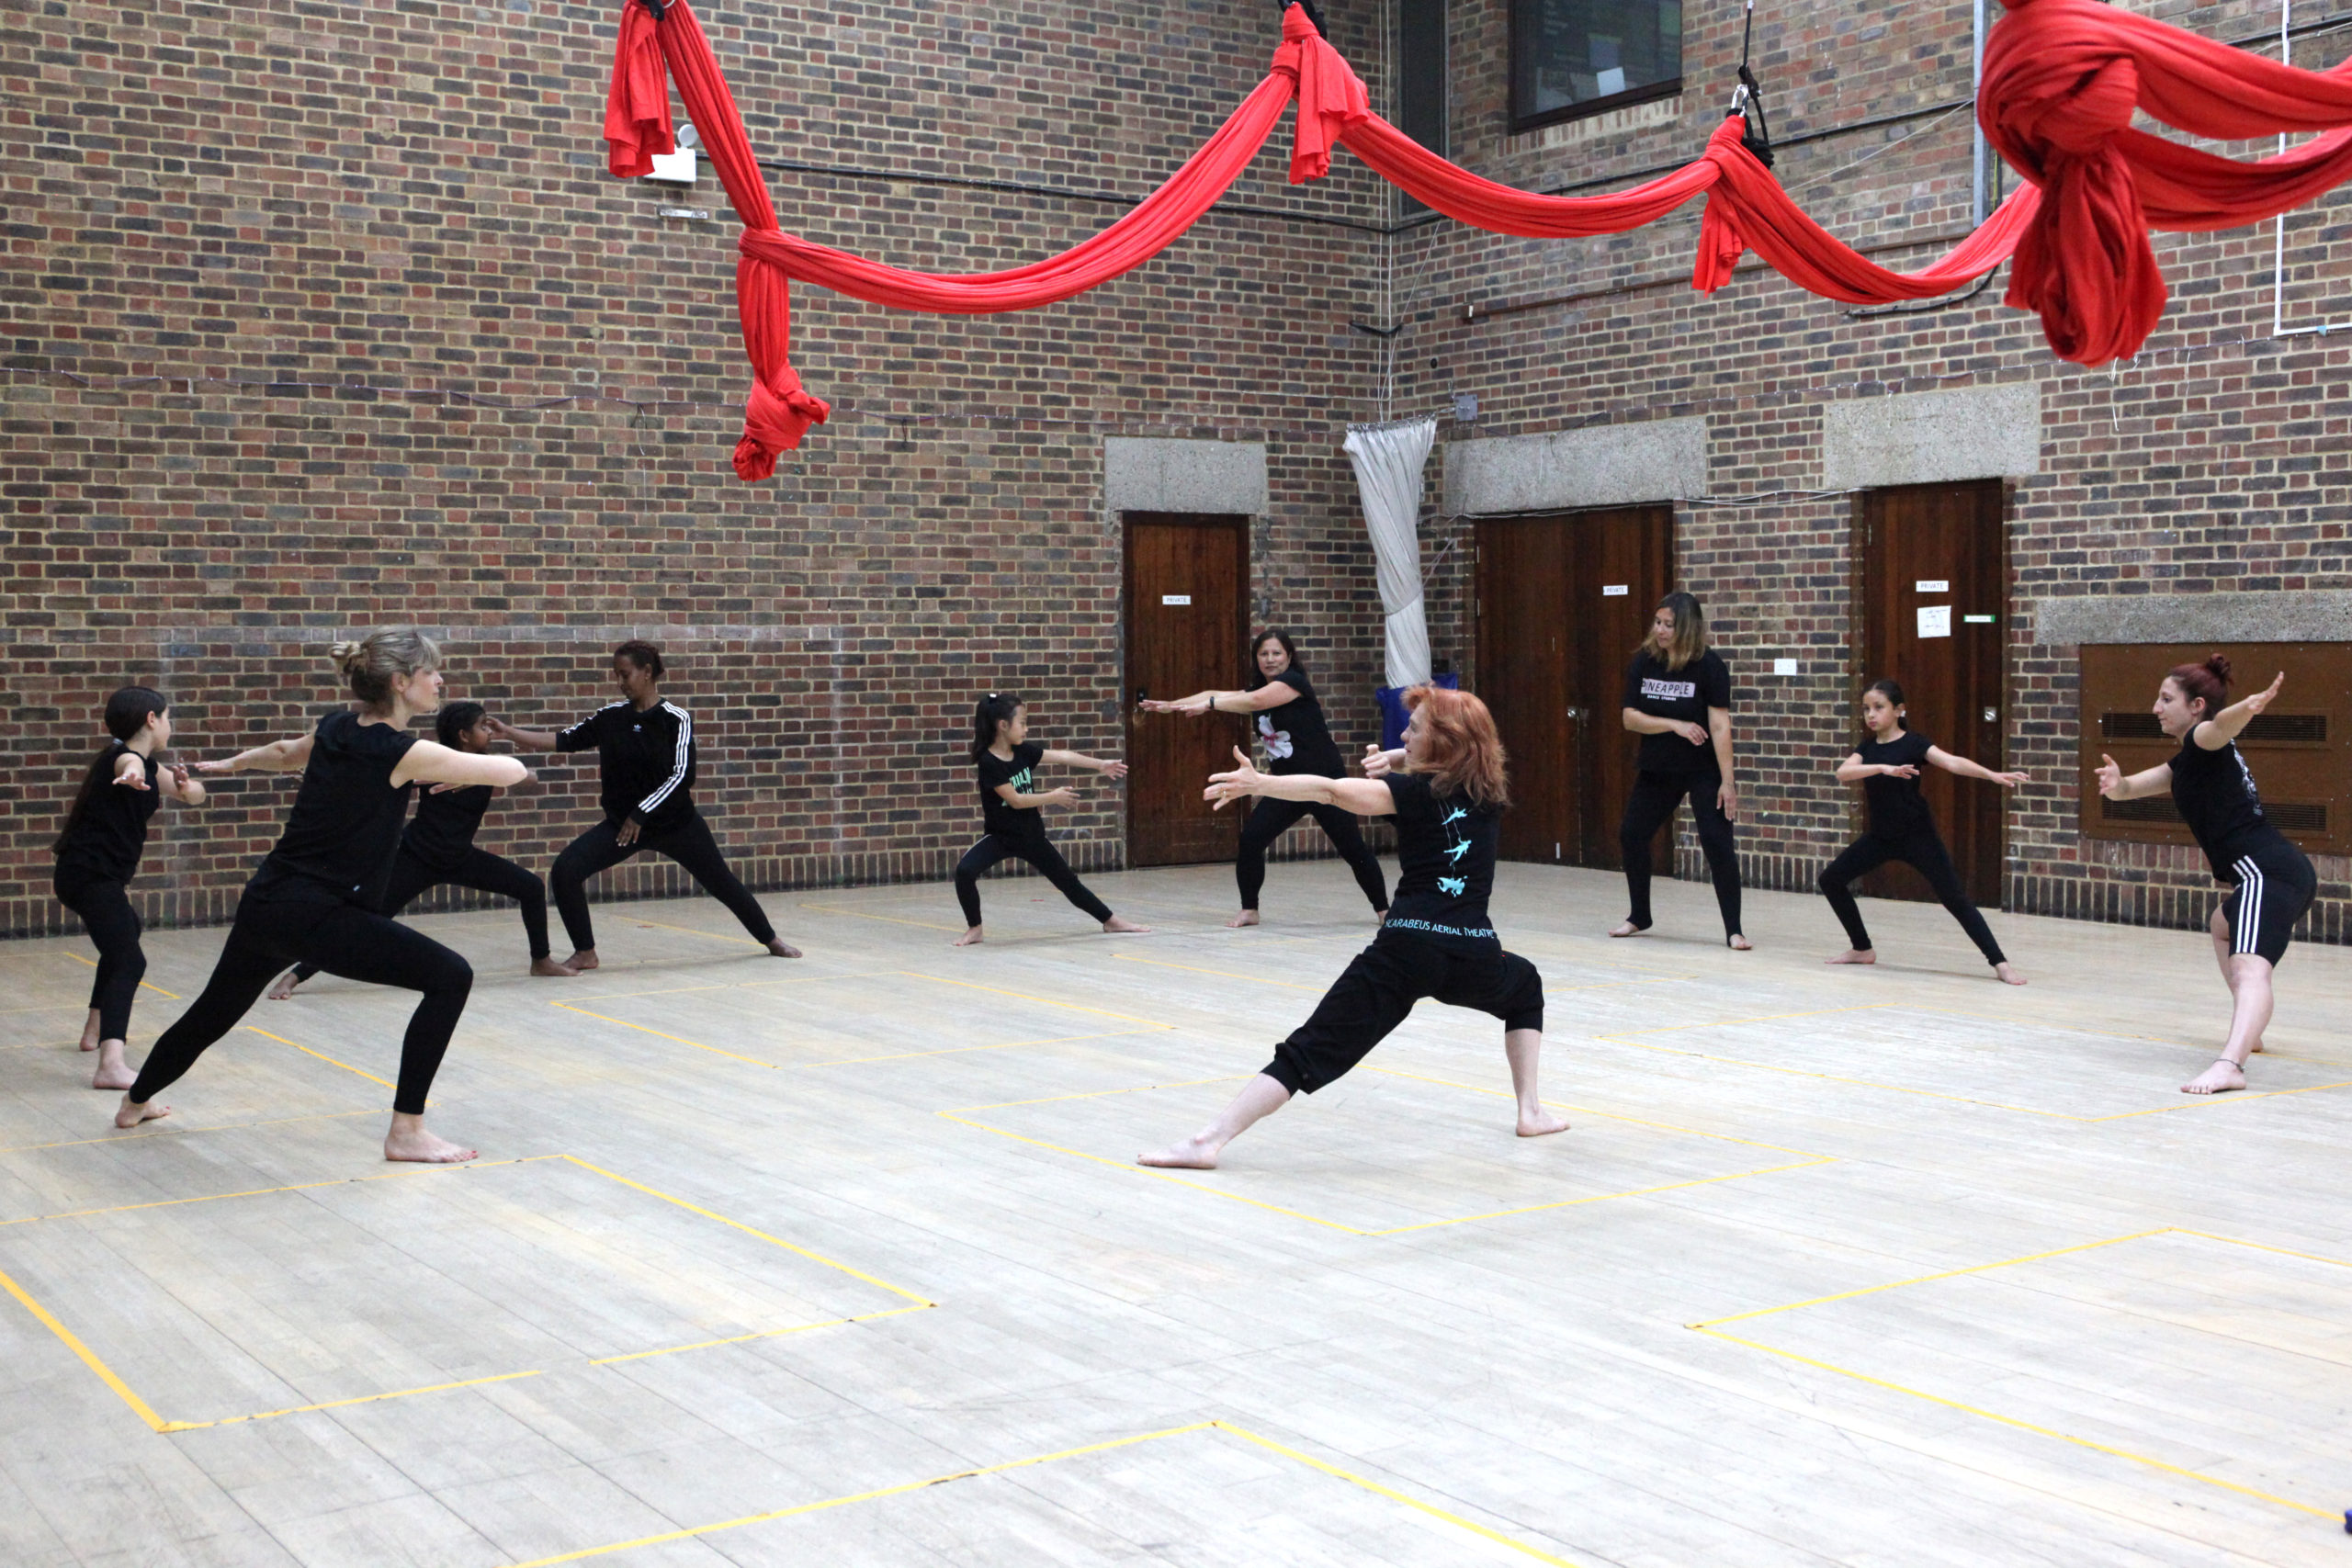 A group of families and tutors warm up in a circle, stretching their arms, the bright red silks suspended above their heads contrast with the pale wooden floor of the hall they're in.